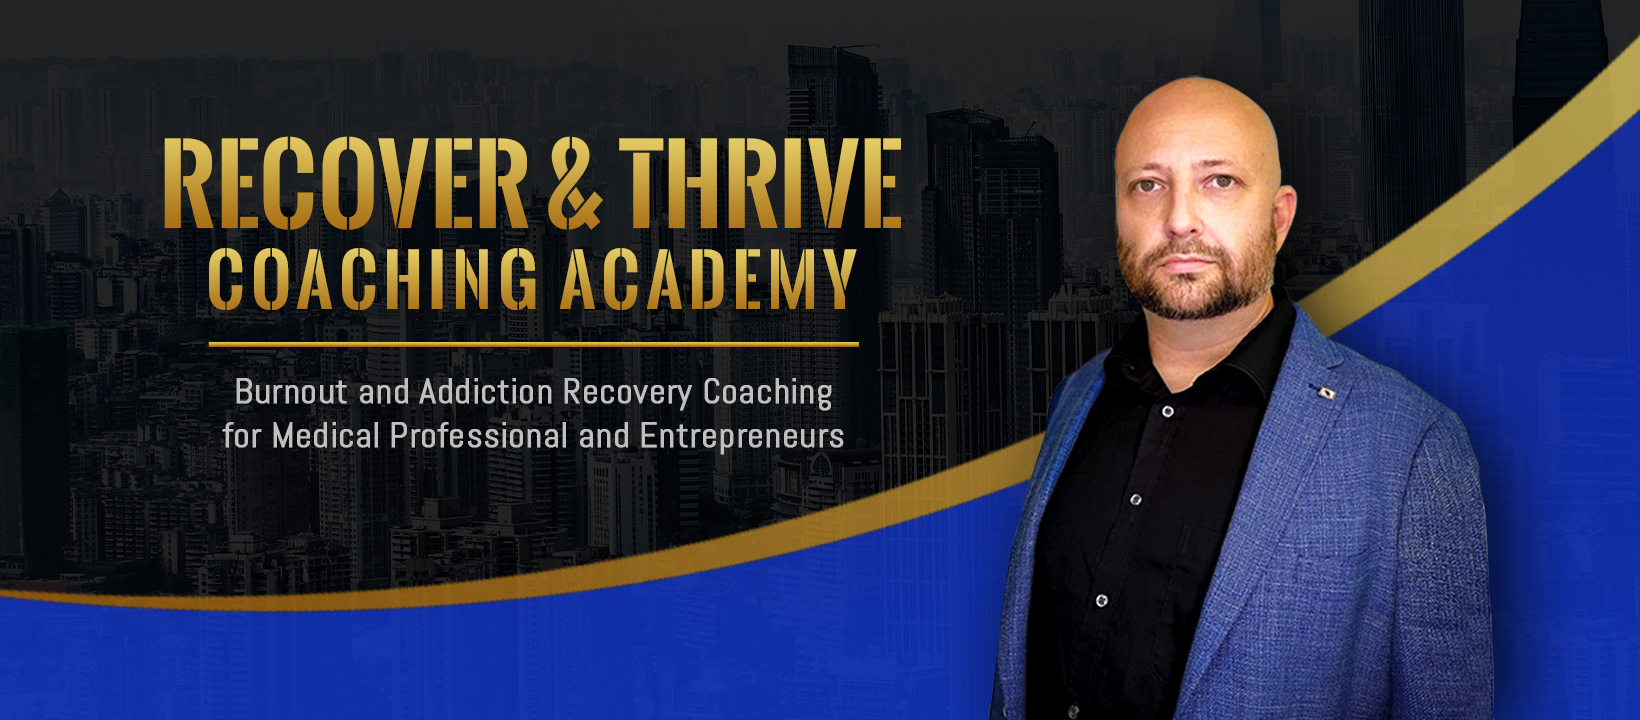 Dr. Robert Zoppa, Serial Entrepreneur, Announces His Business Consulting "Recover & Thrive Coaching Academy"